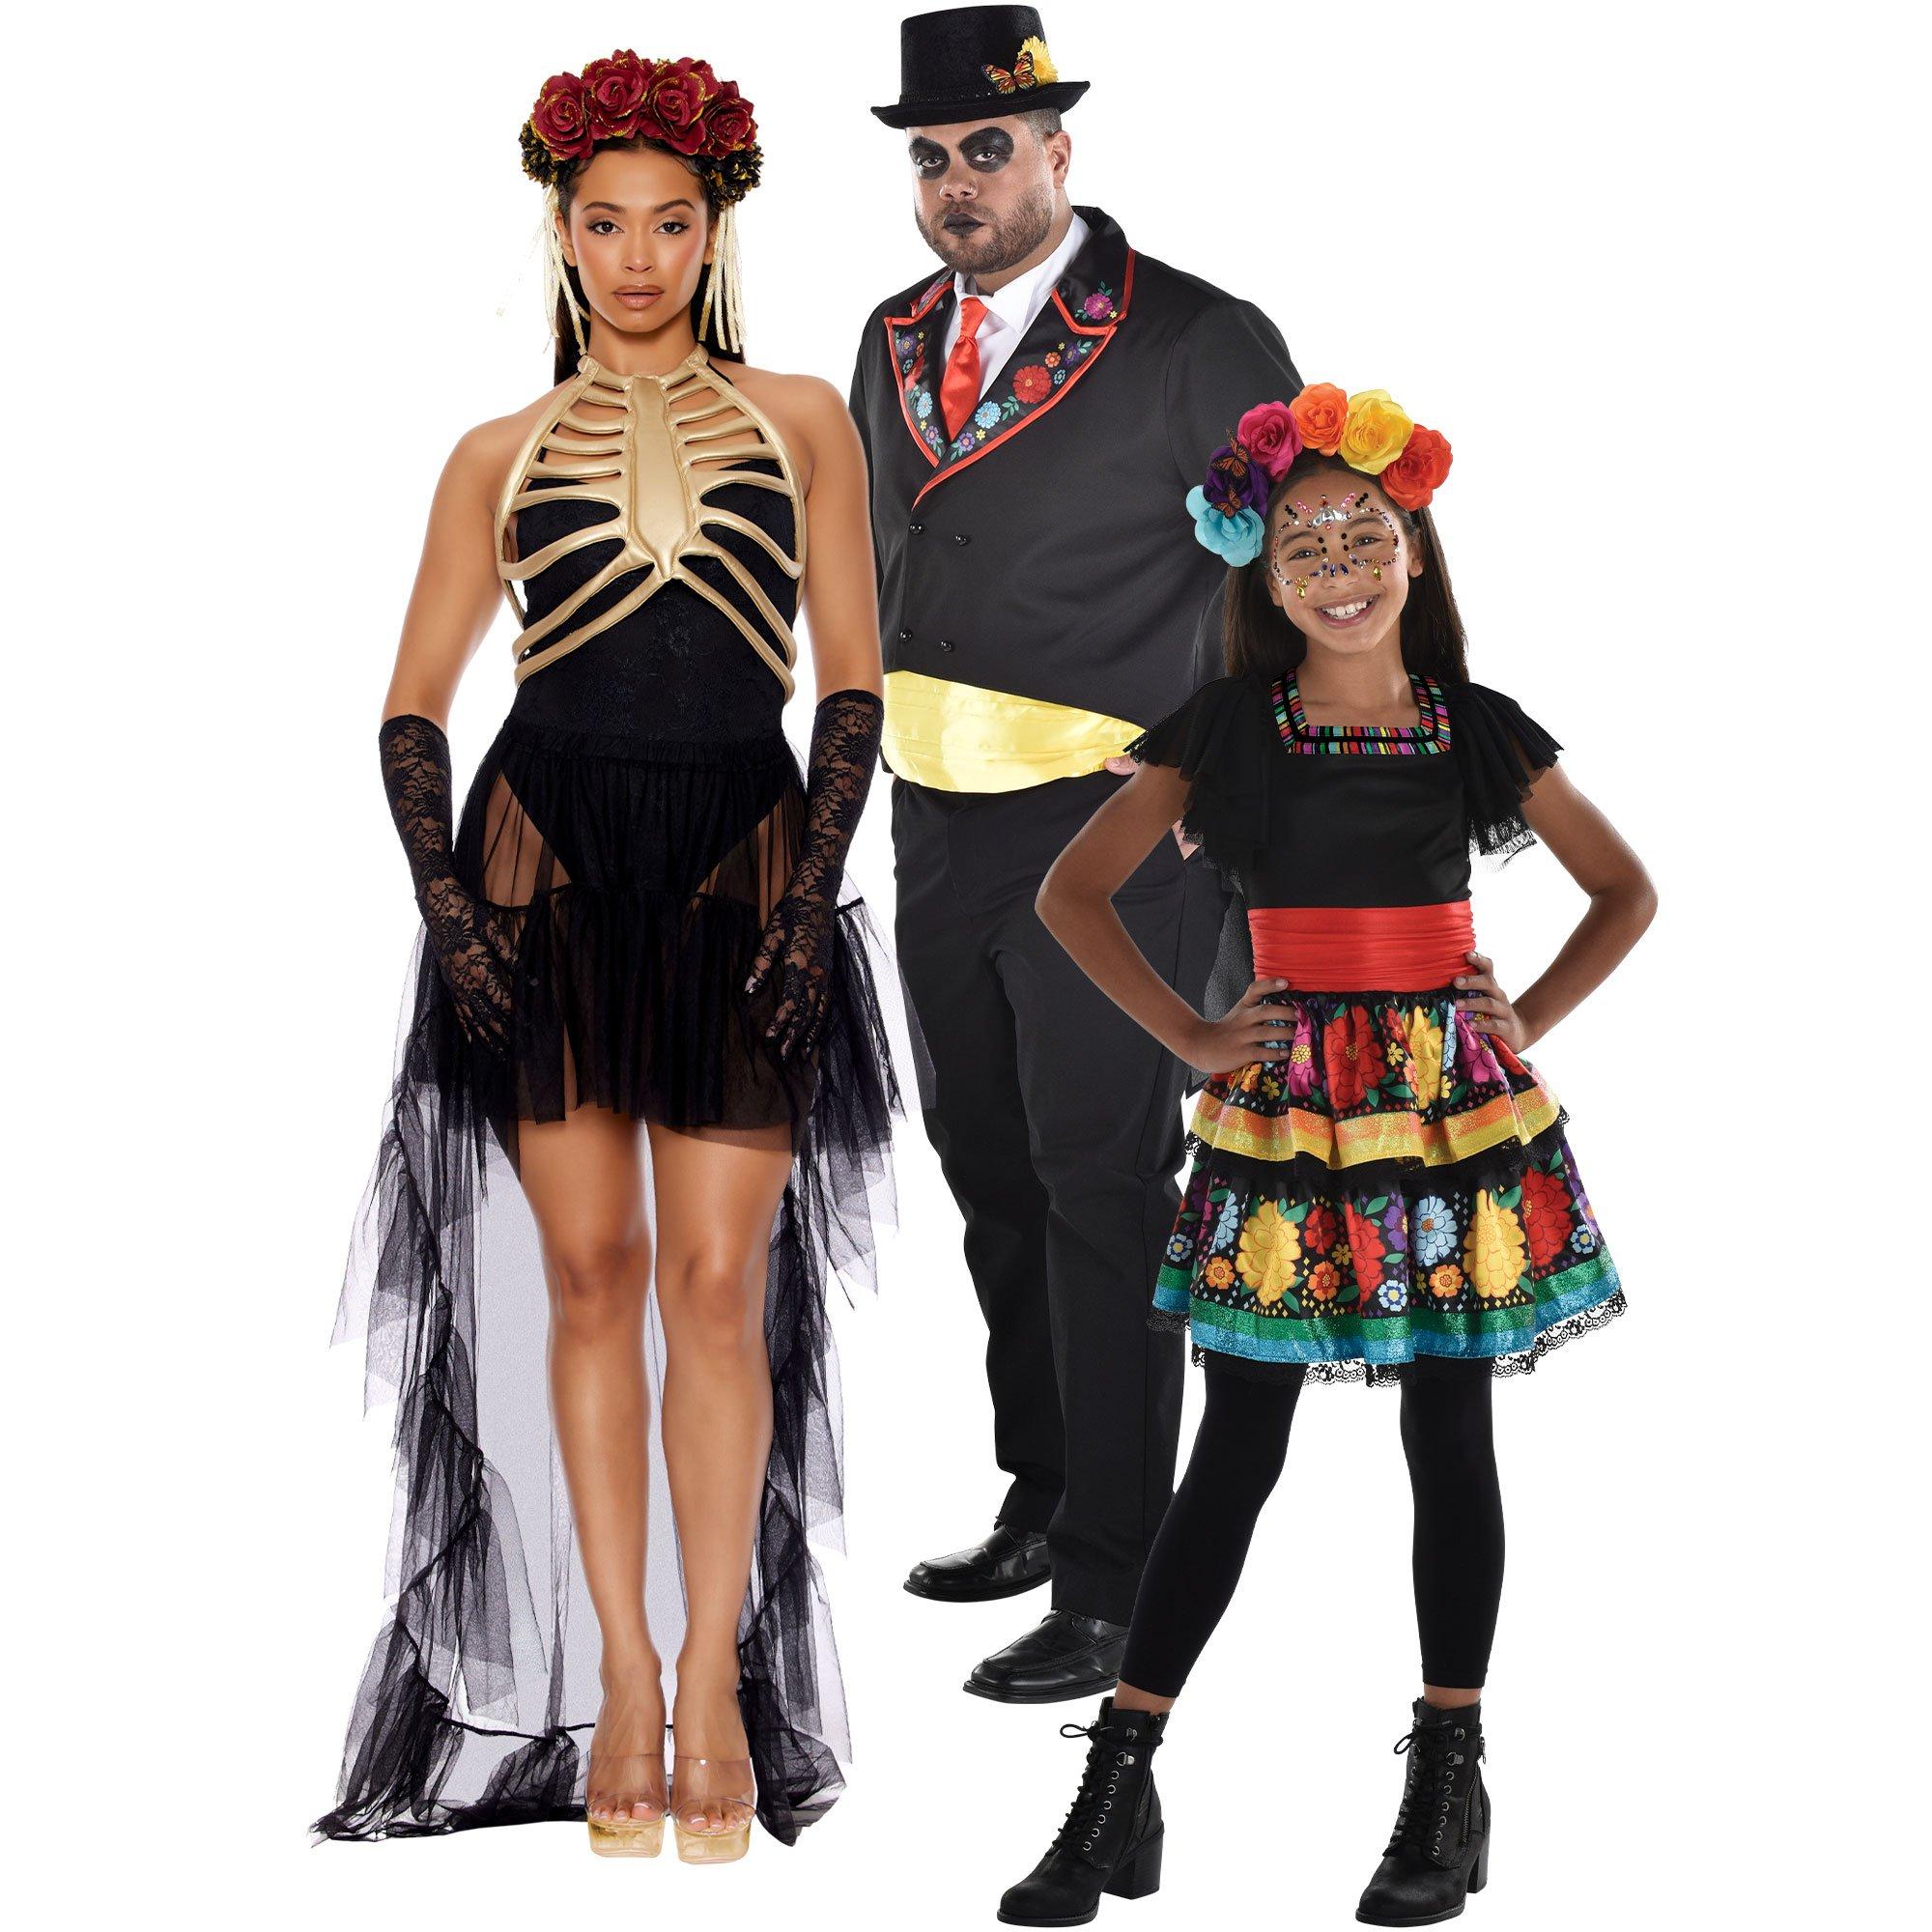 Day of the Dead Family Costumes